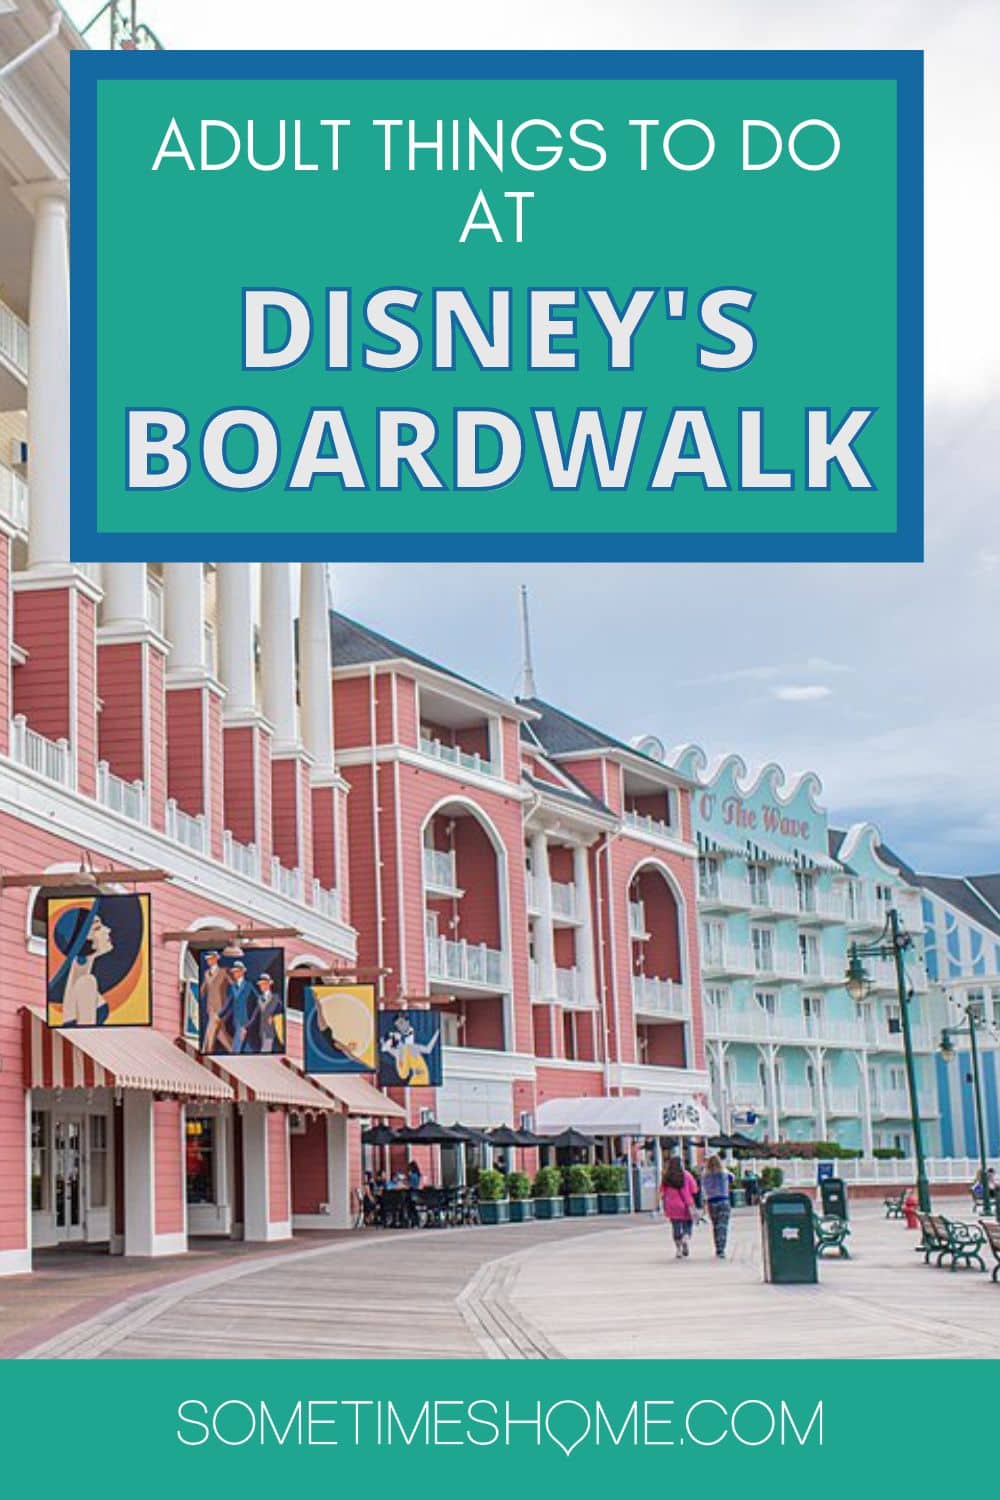 Adult Things to Do on Disney's Boardwalk with a picture of the colorful facades of the Boardwalk Inn hotel.